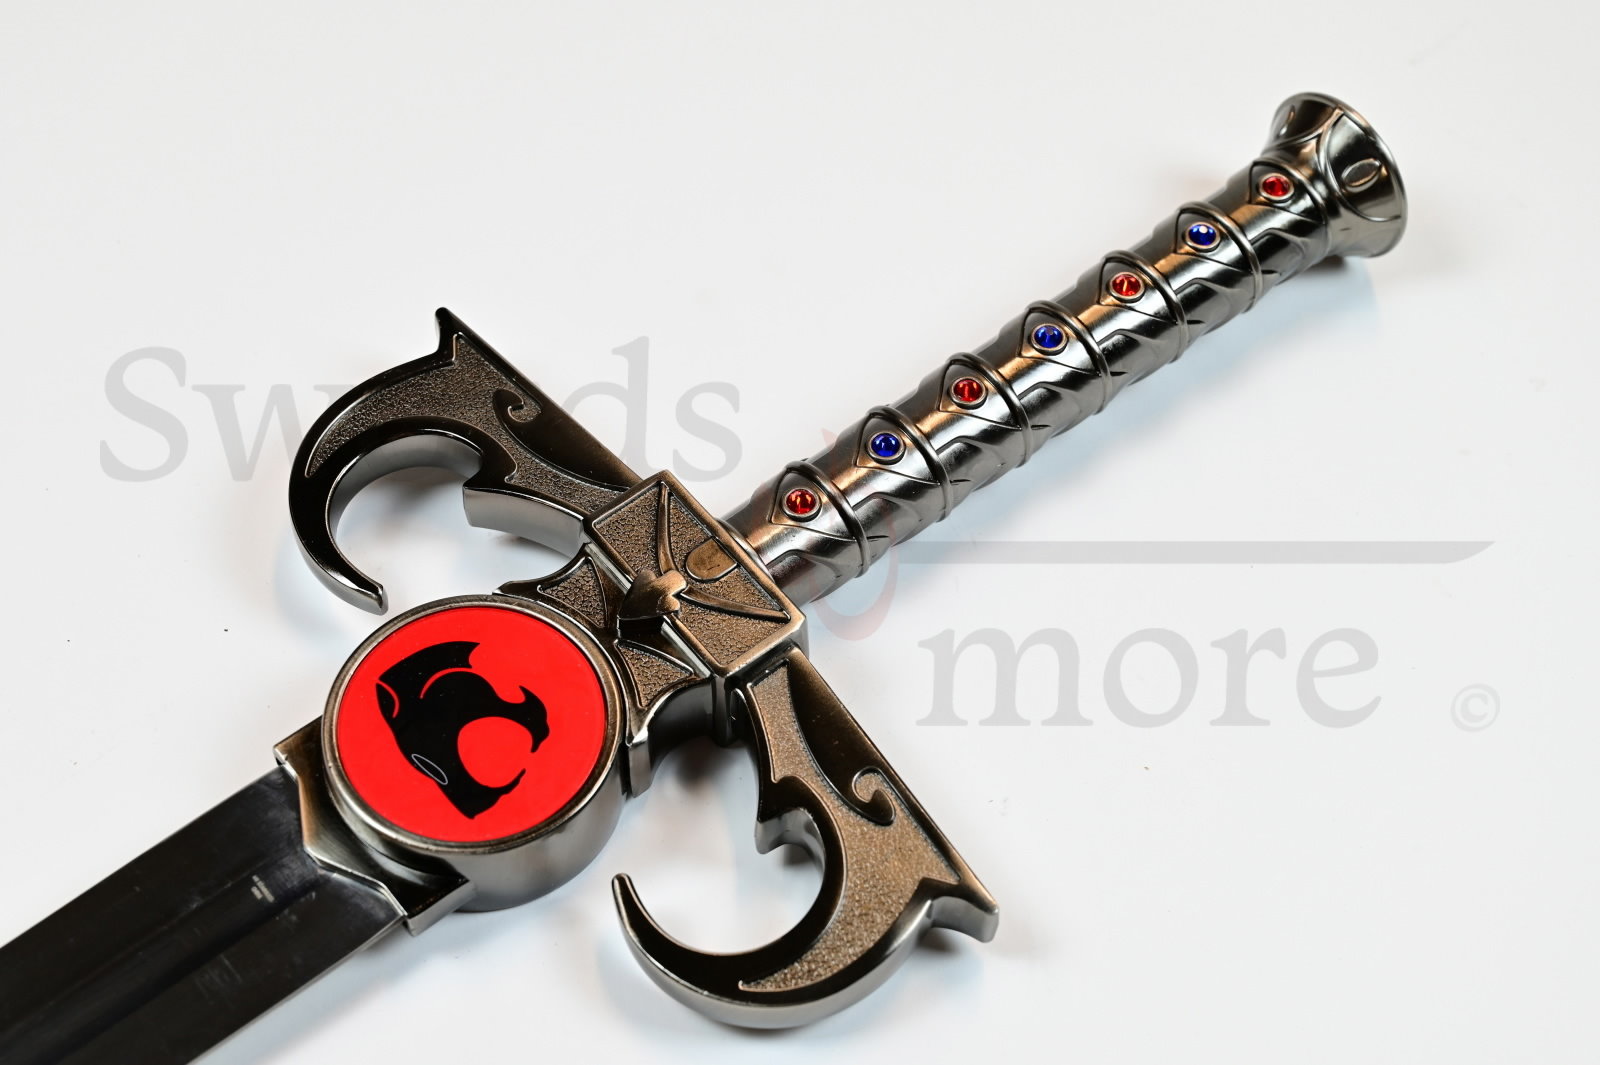 ThunderCats - The Sword of the Omens with sheath